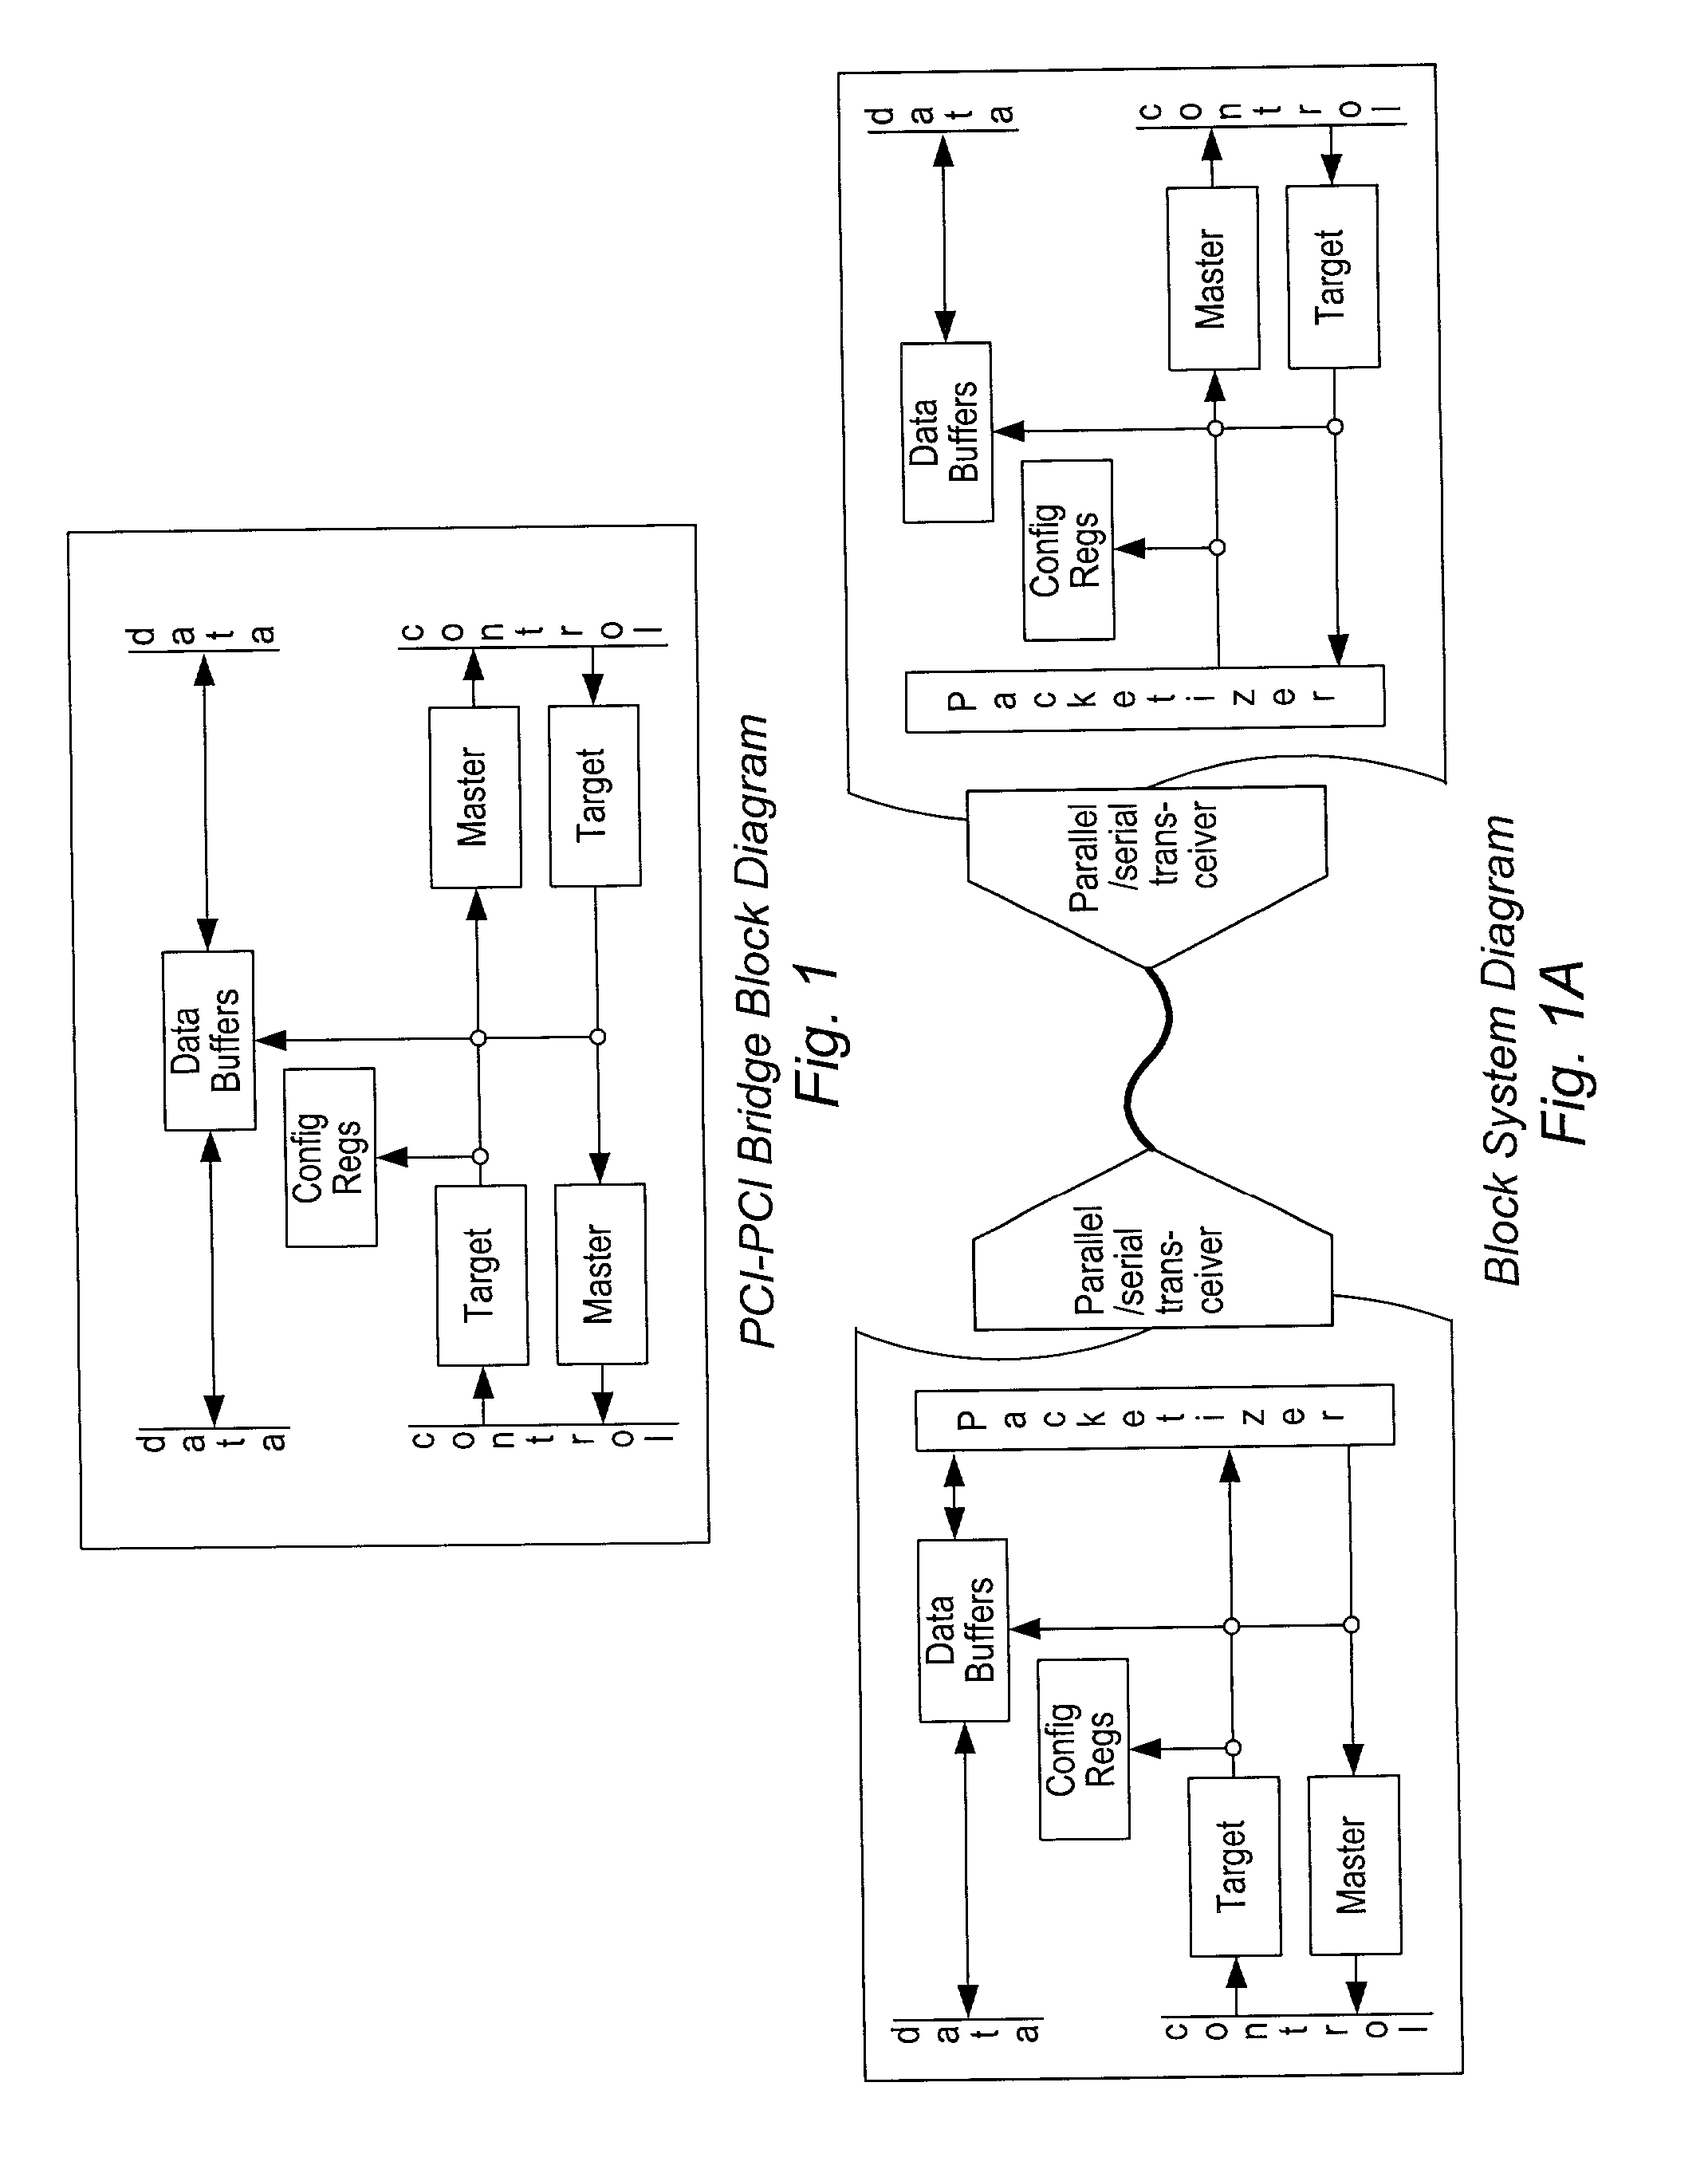 System and method for coupling peripheral buses through a serial bus using a split bridge implementation